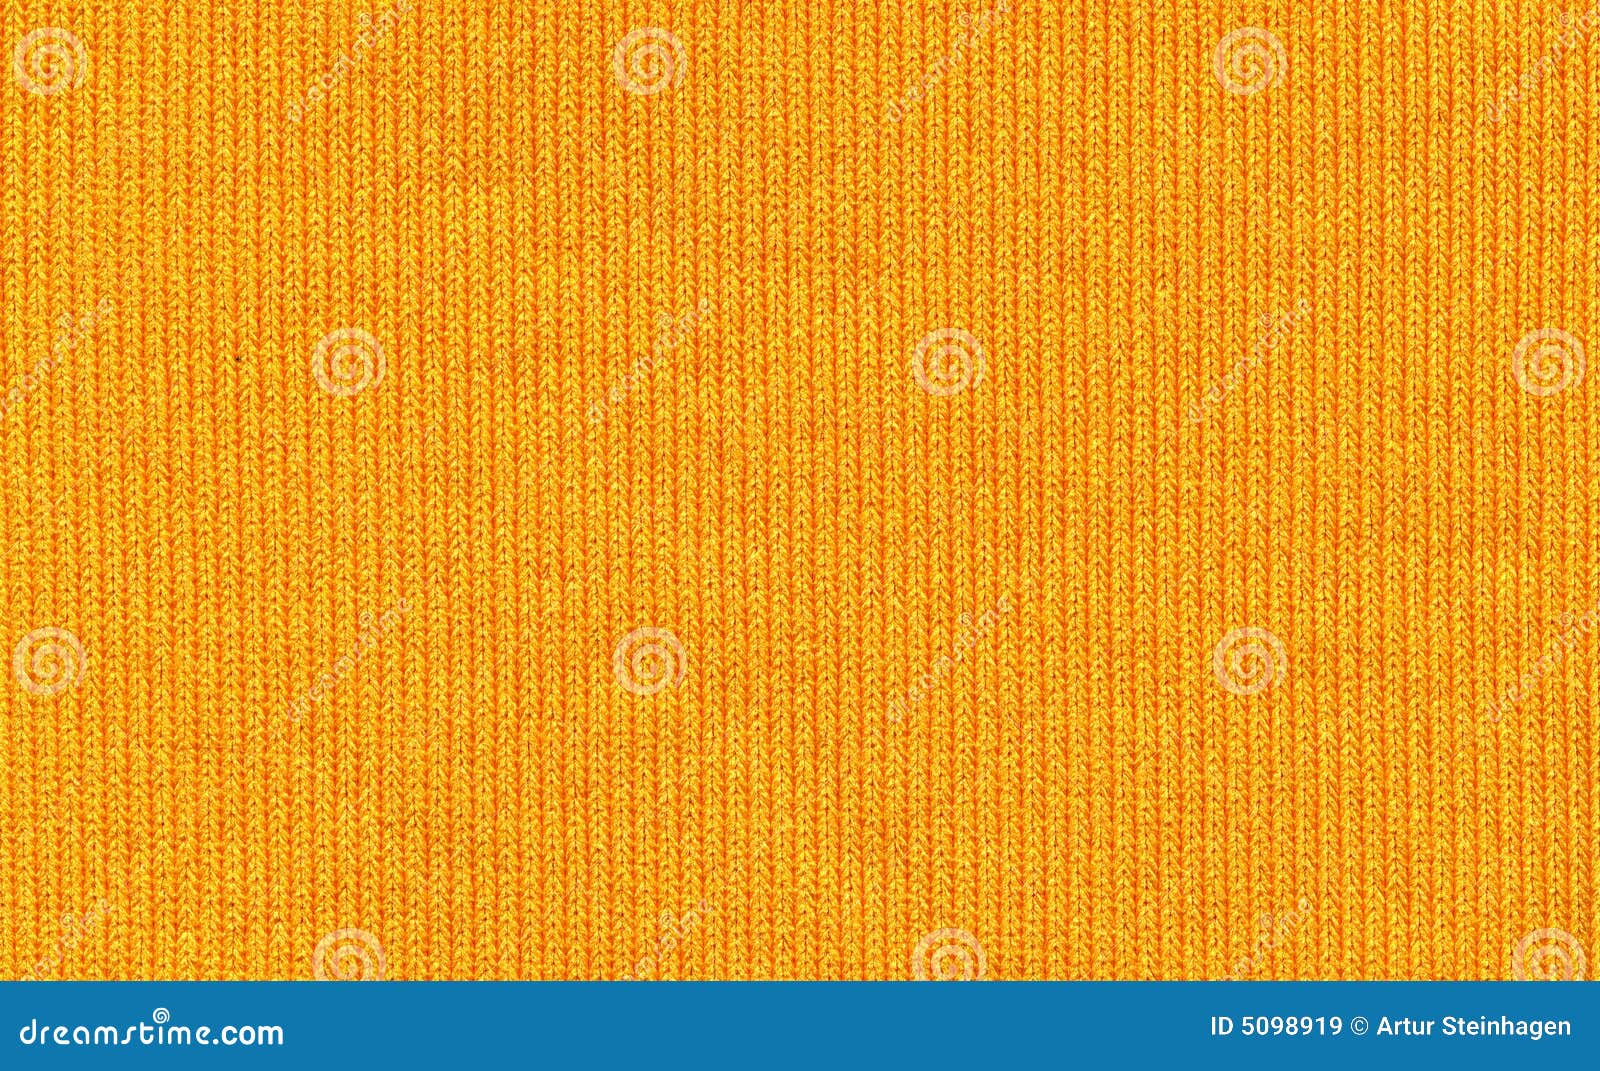 Close-up of the Yellow Syntetic Fiber Stock Image - Image of mustard ...